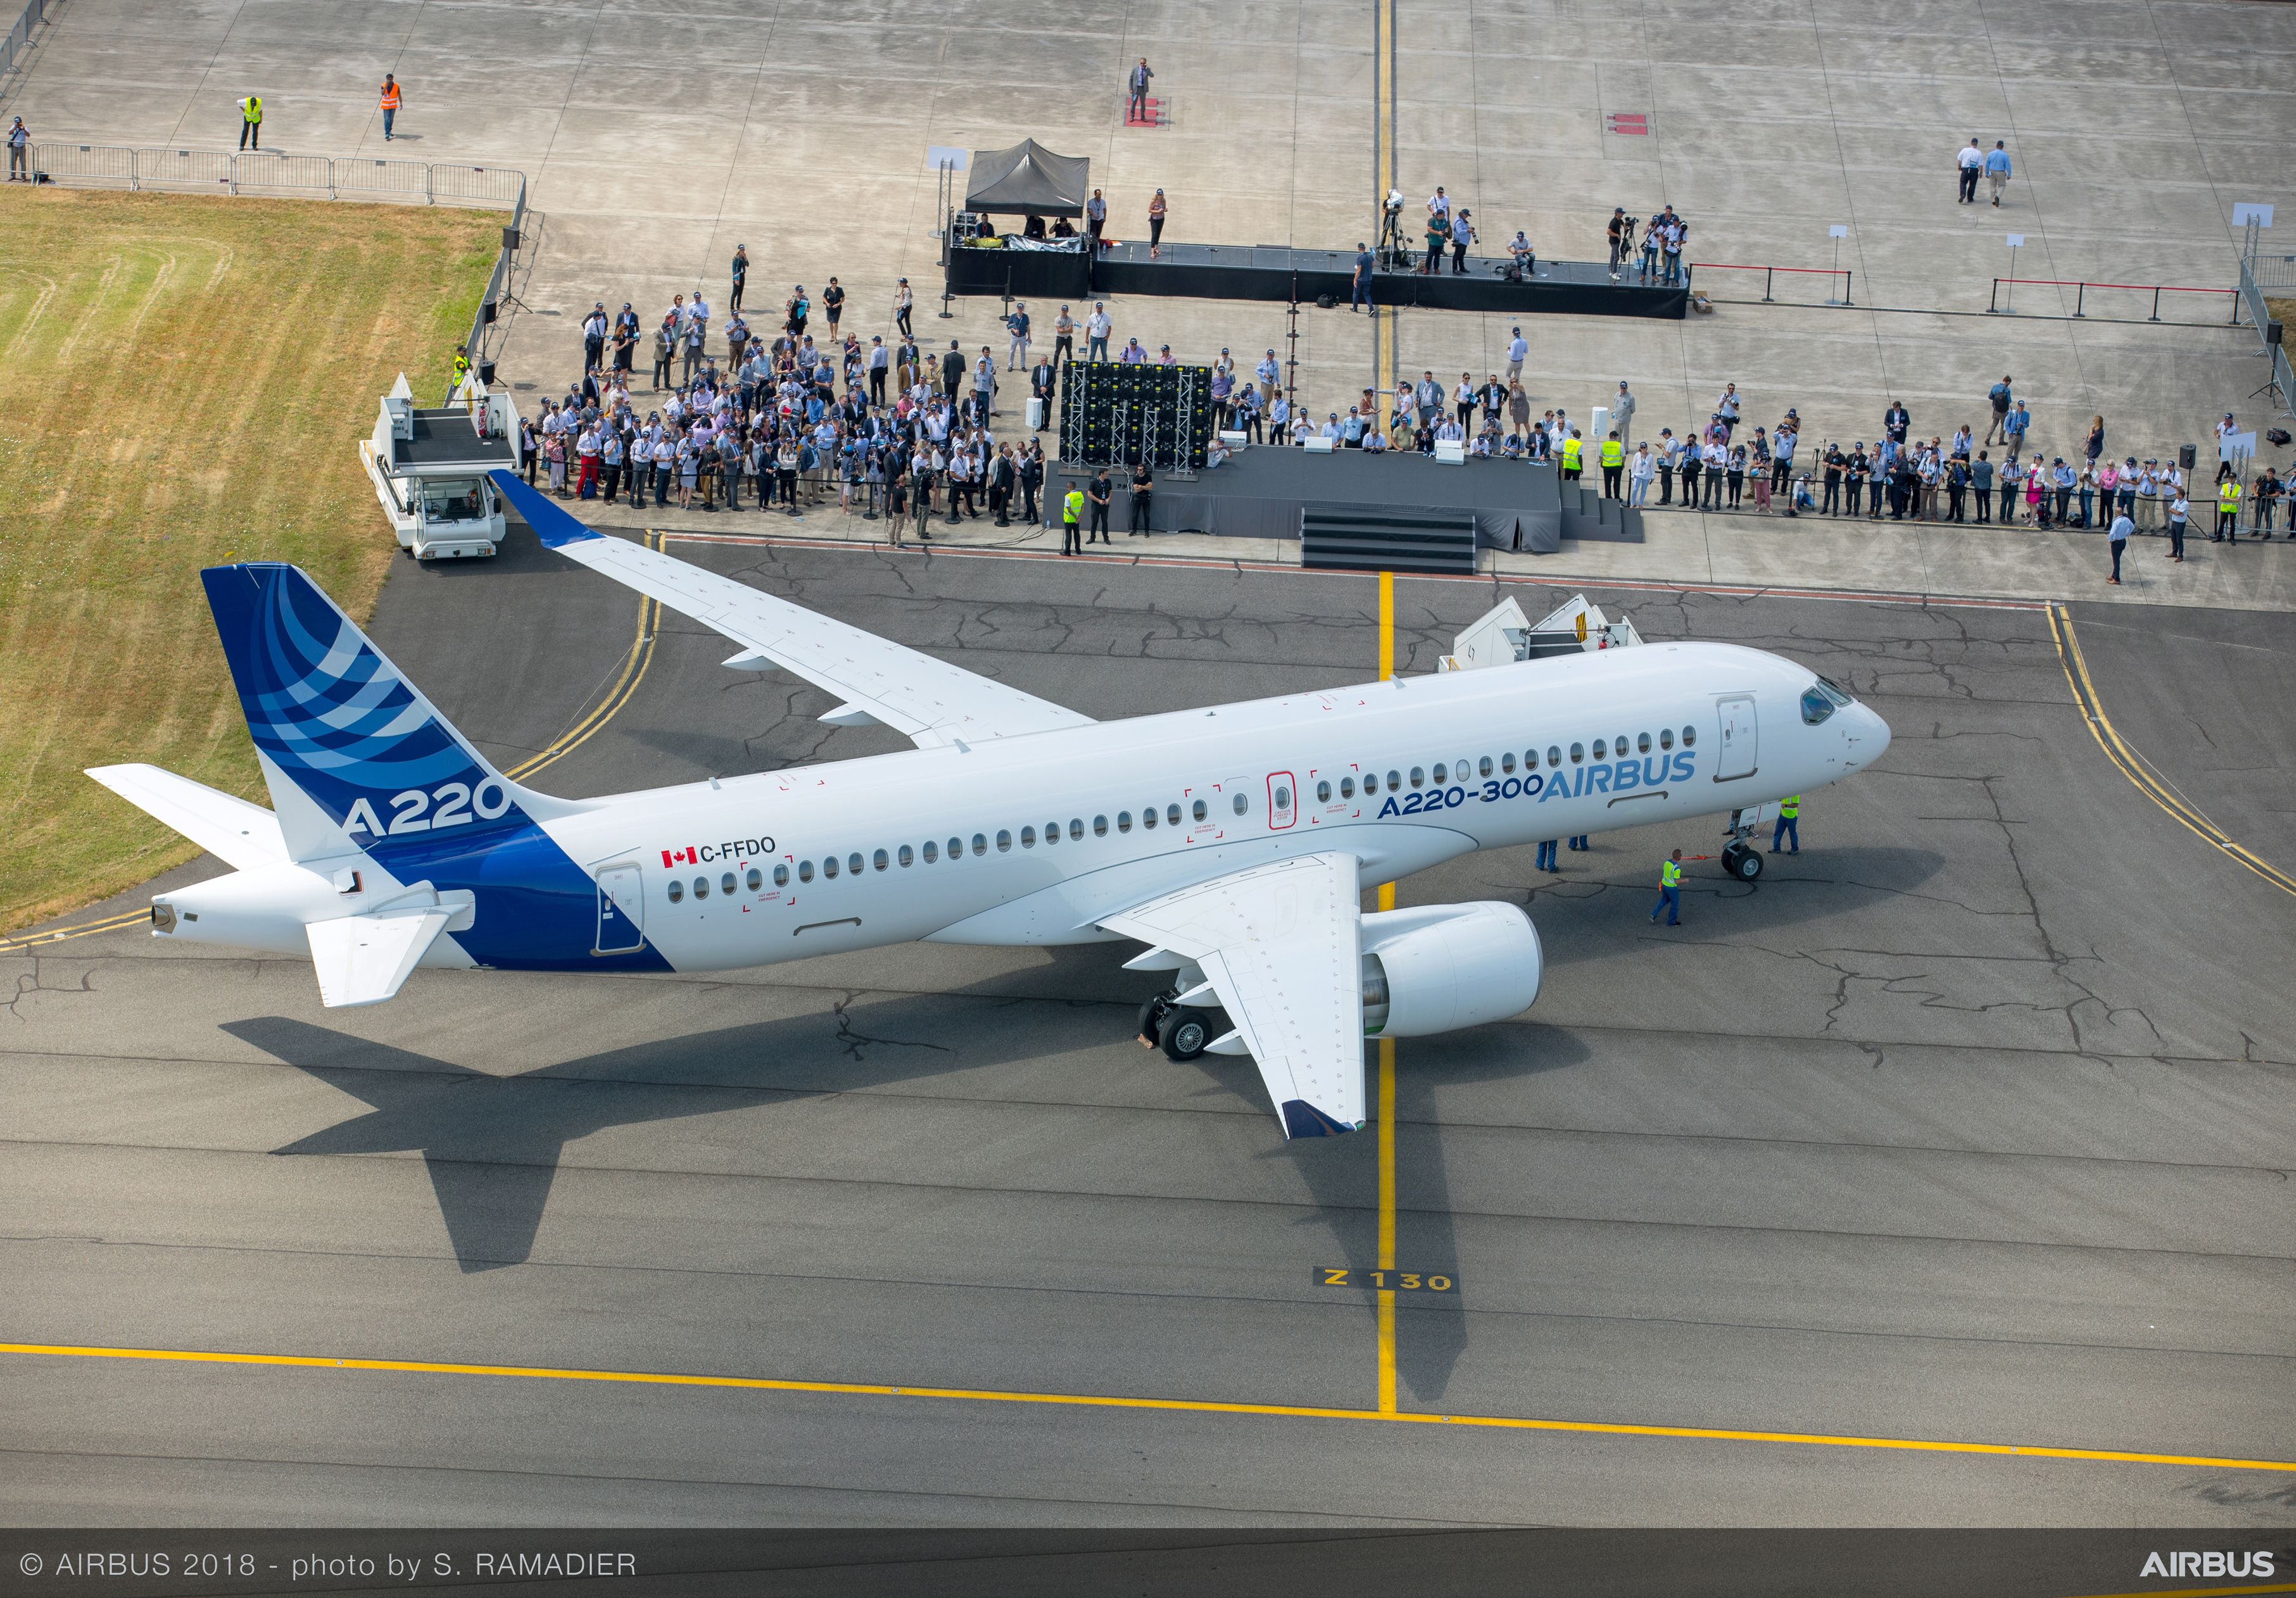 Airbus A220 Family